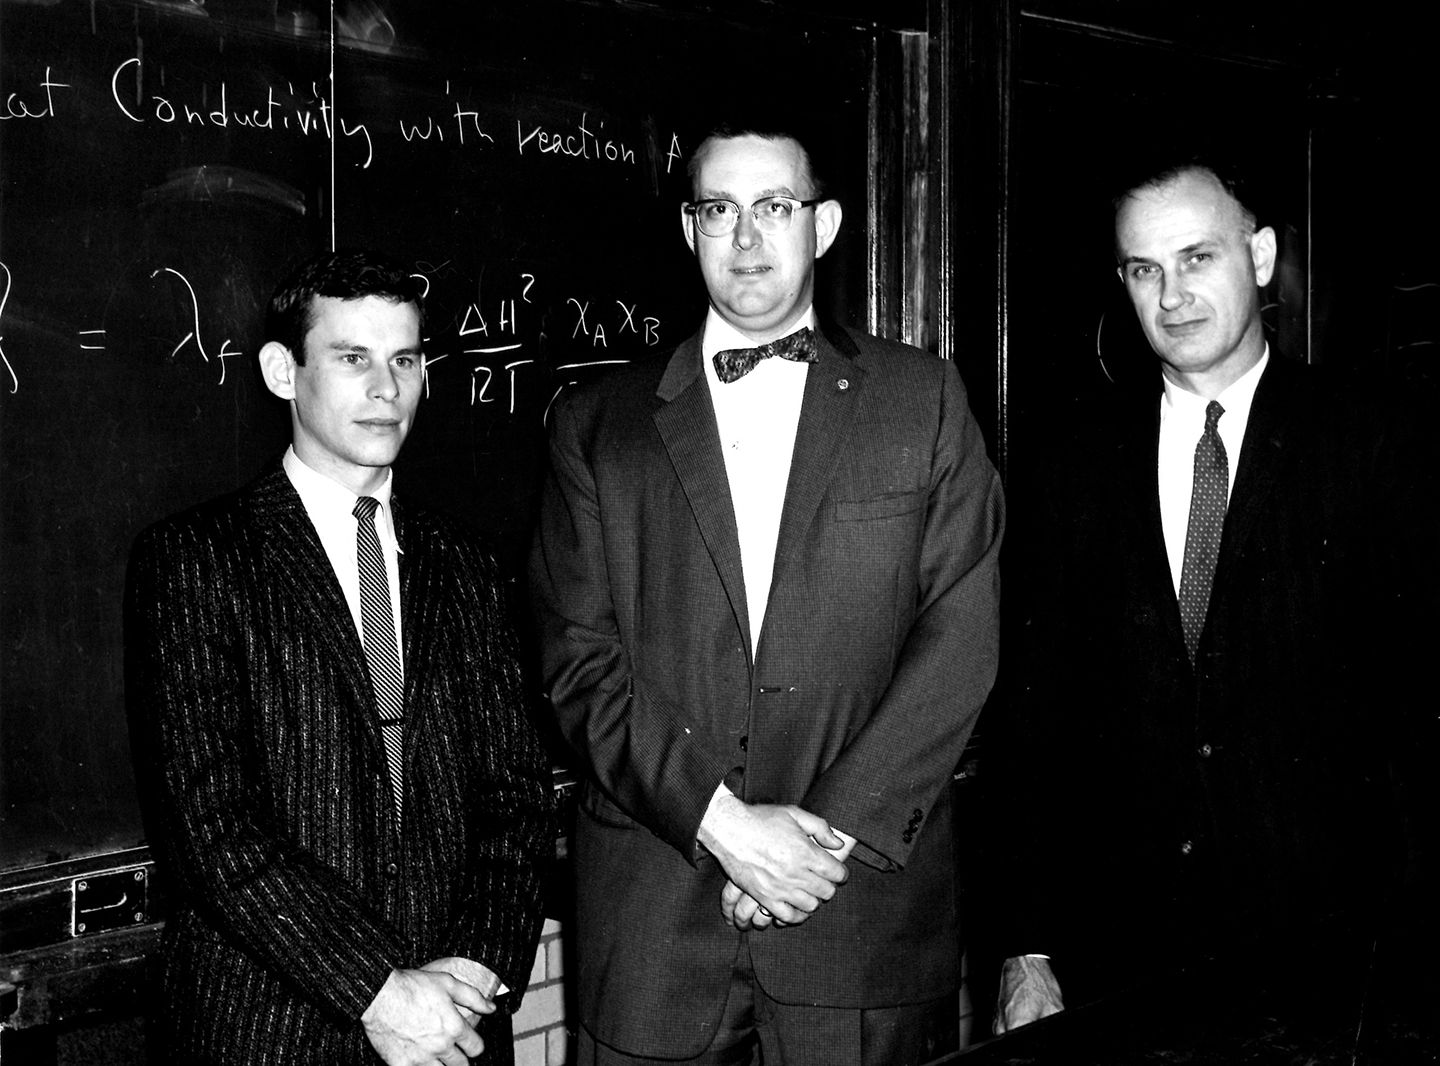 Three men in an old photo standing in front of a chalkboard wearing suits